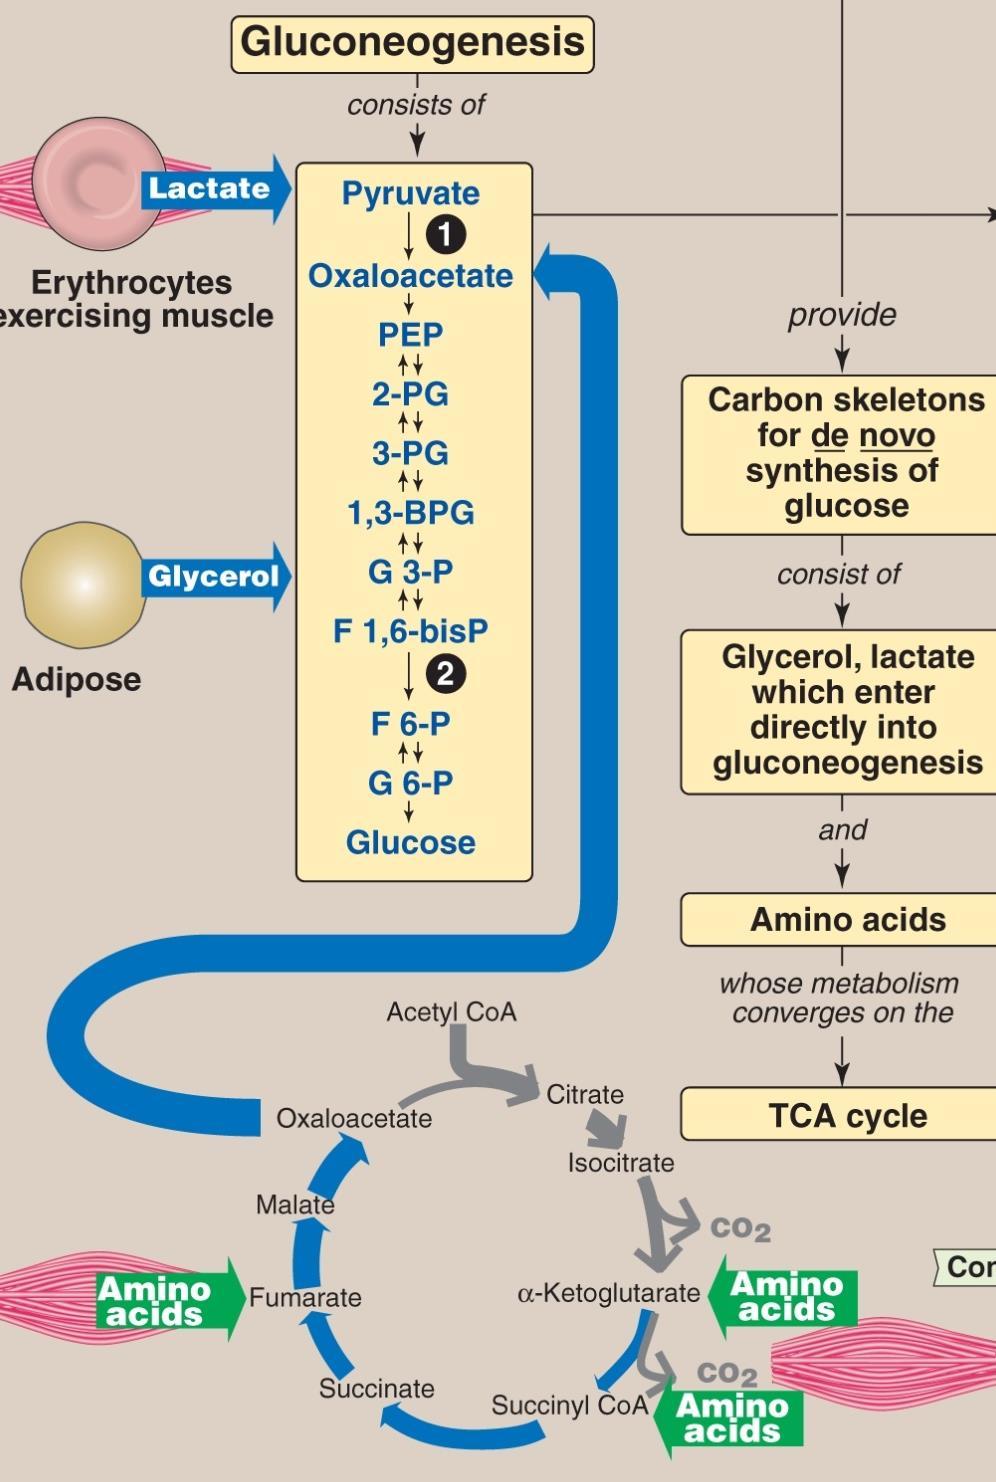 Reactions unique to gluconeogenesis C. Decarboxylation of cytosolic oxaloacetate (need GTP) Oxaloacetate is decarboxylated and phosphorylated to PEP in the cytosol by PEP- carboxykinase.